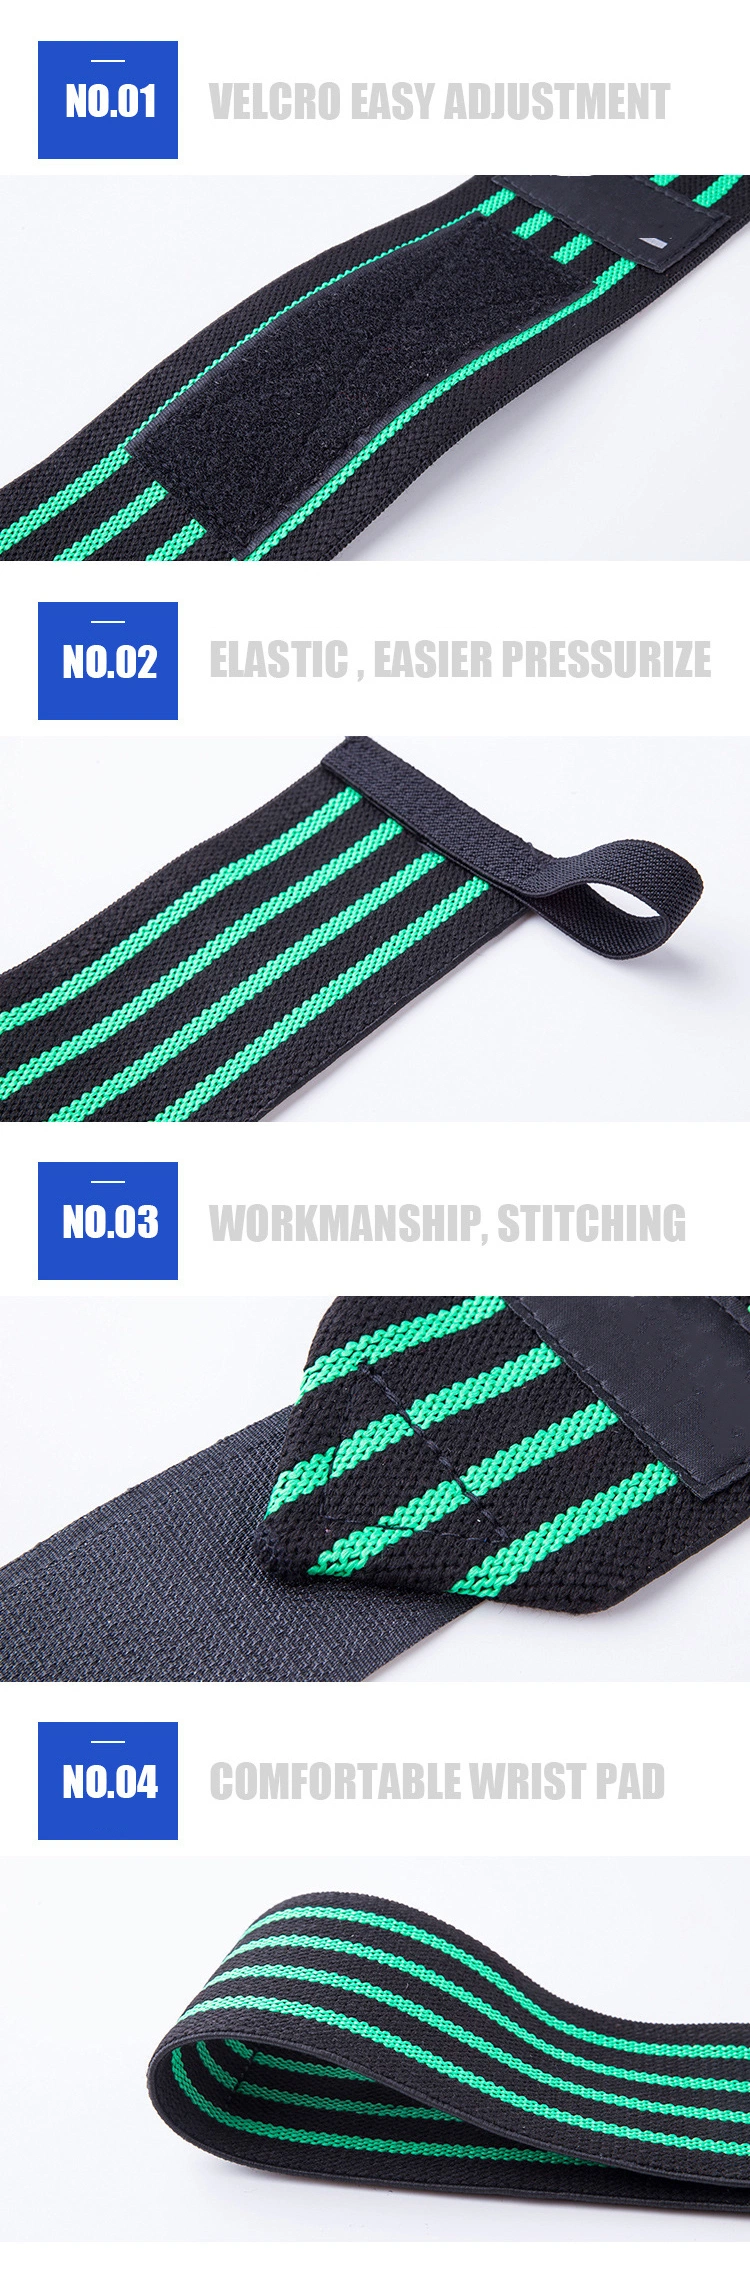 Weightlifting Gym Weight Lifting Straps Fitness Training Wrist Wraps Padded Hand Bands